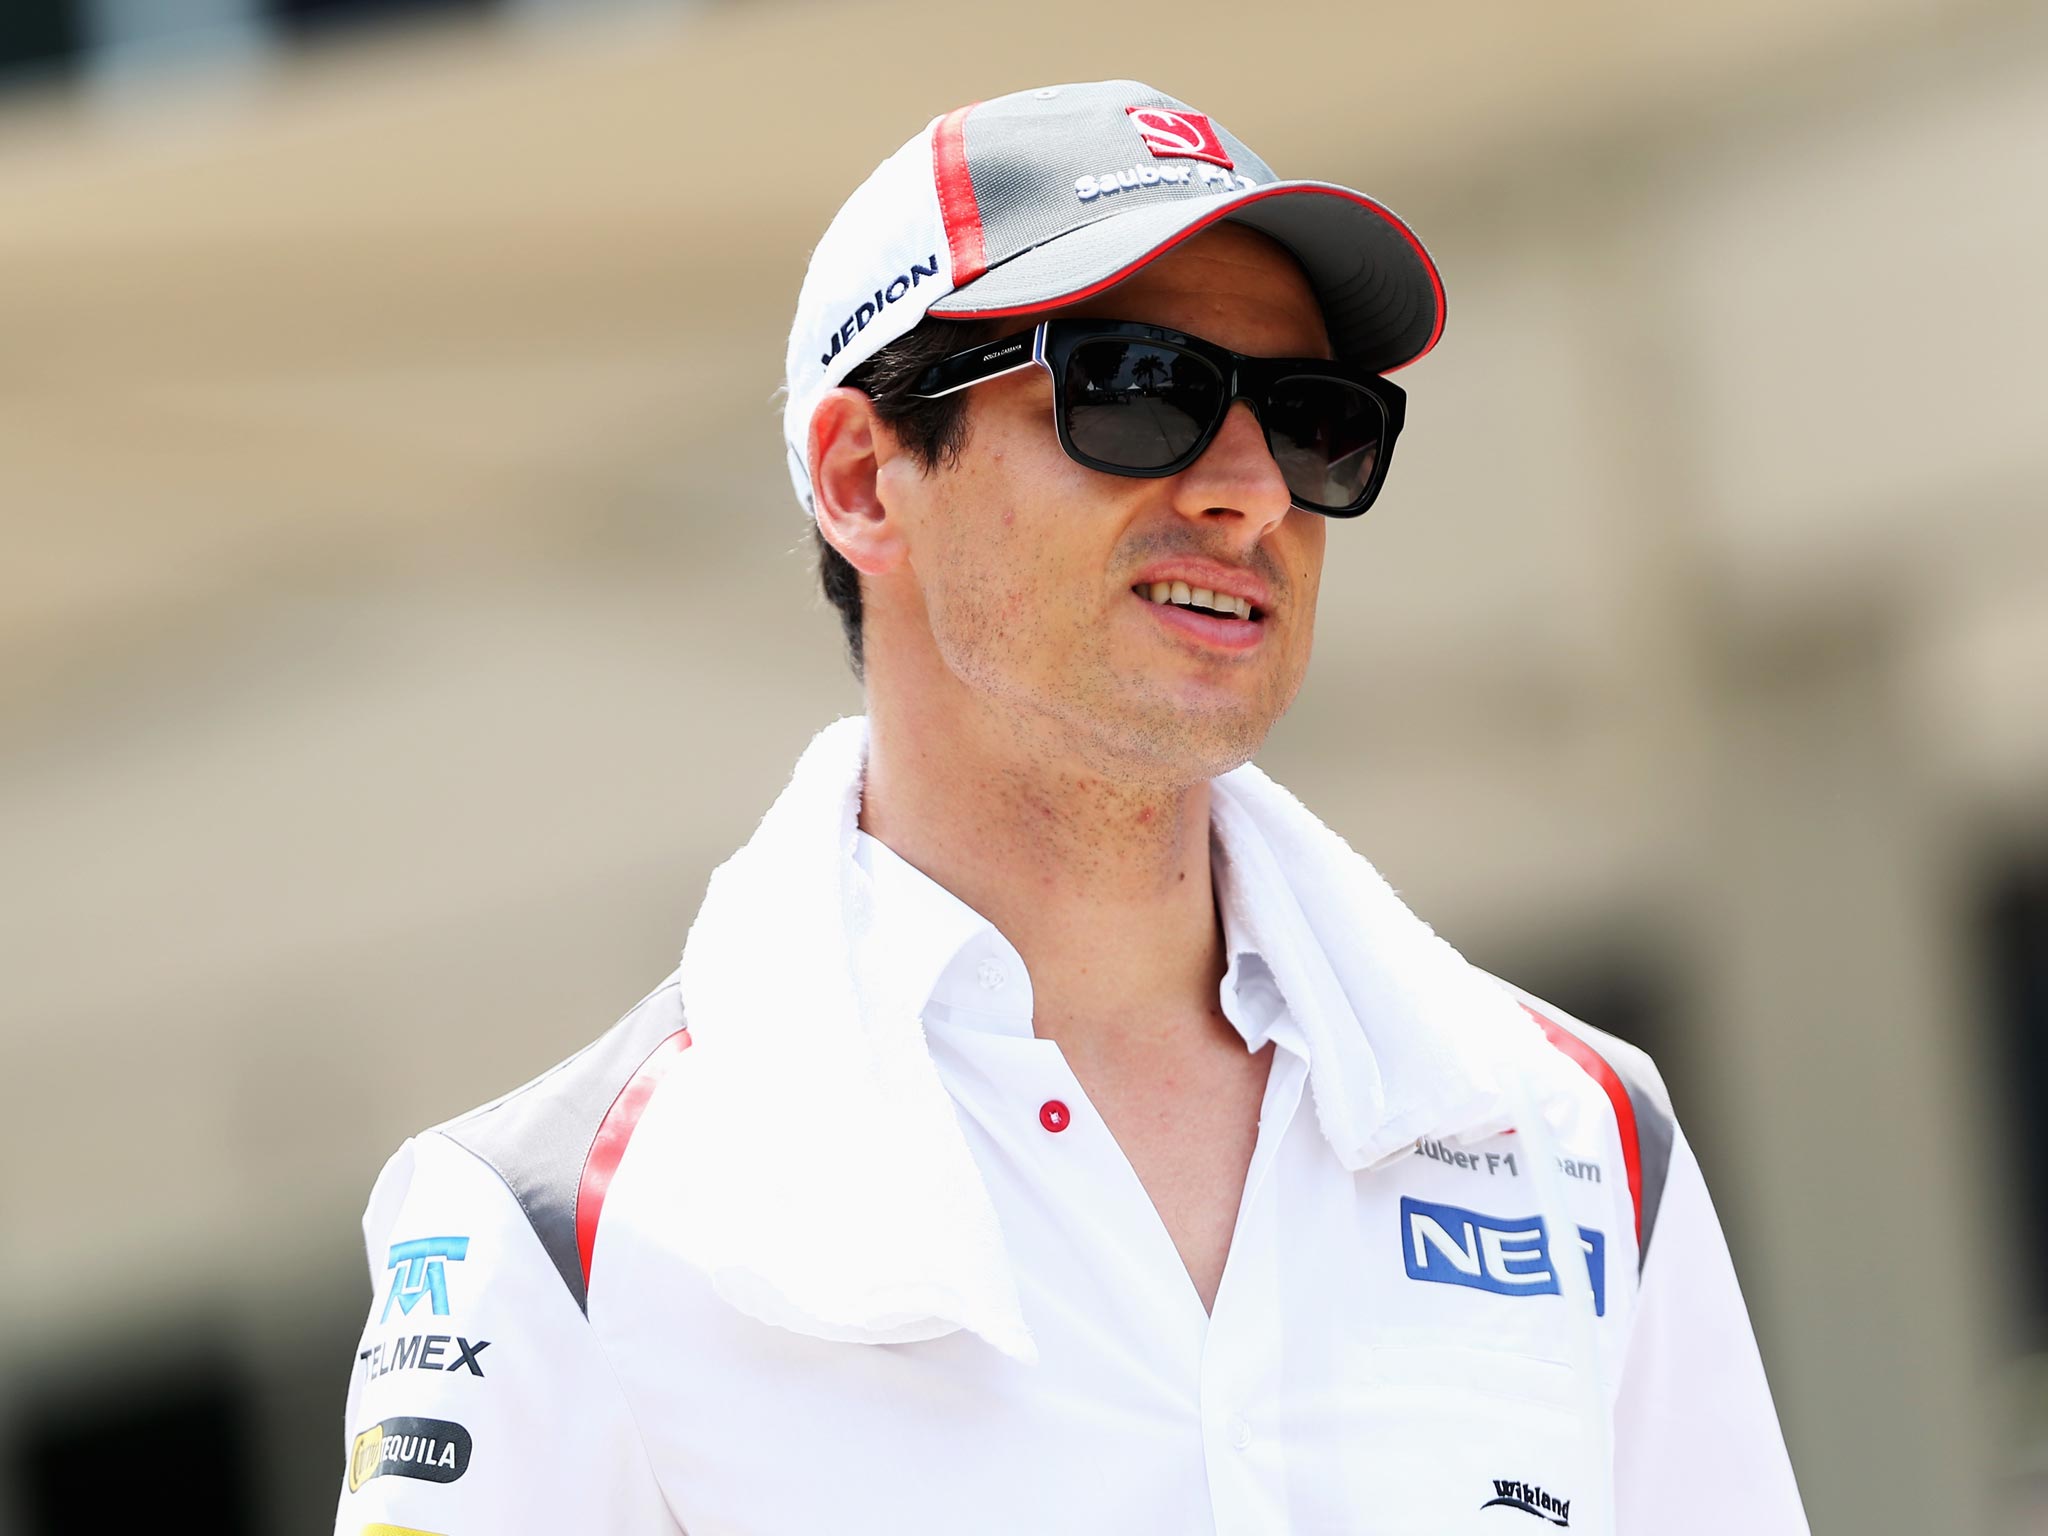 Adrian Sutil feels the new weight limitations in F1 are dangerous given he will have to compete in Bahrain without a drinks bottle